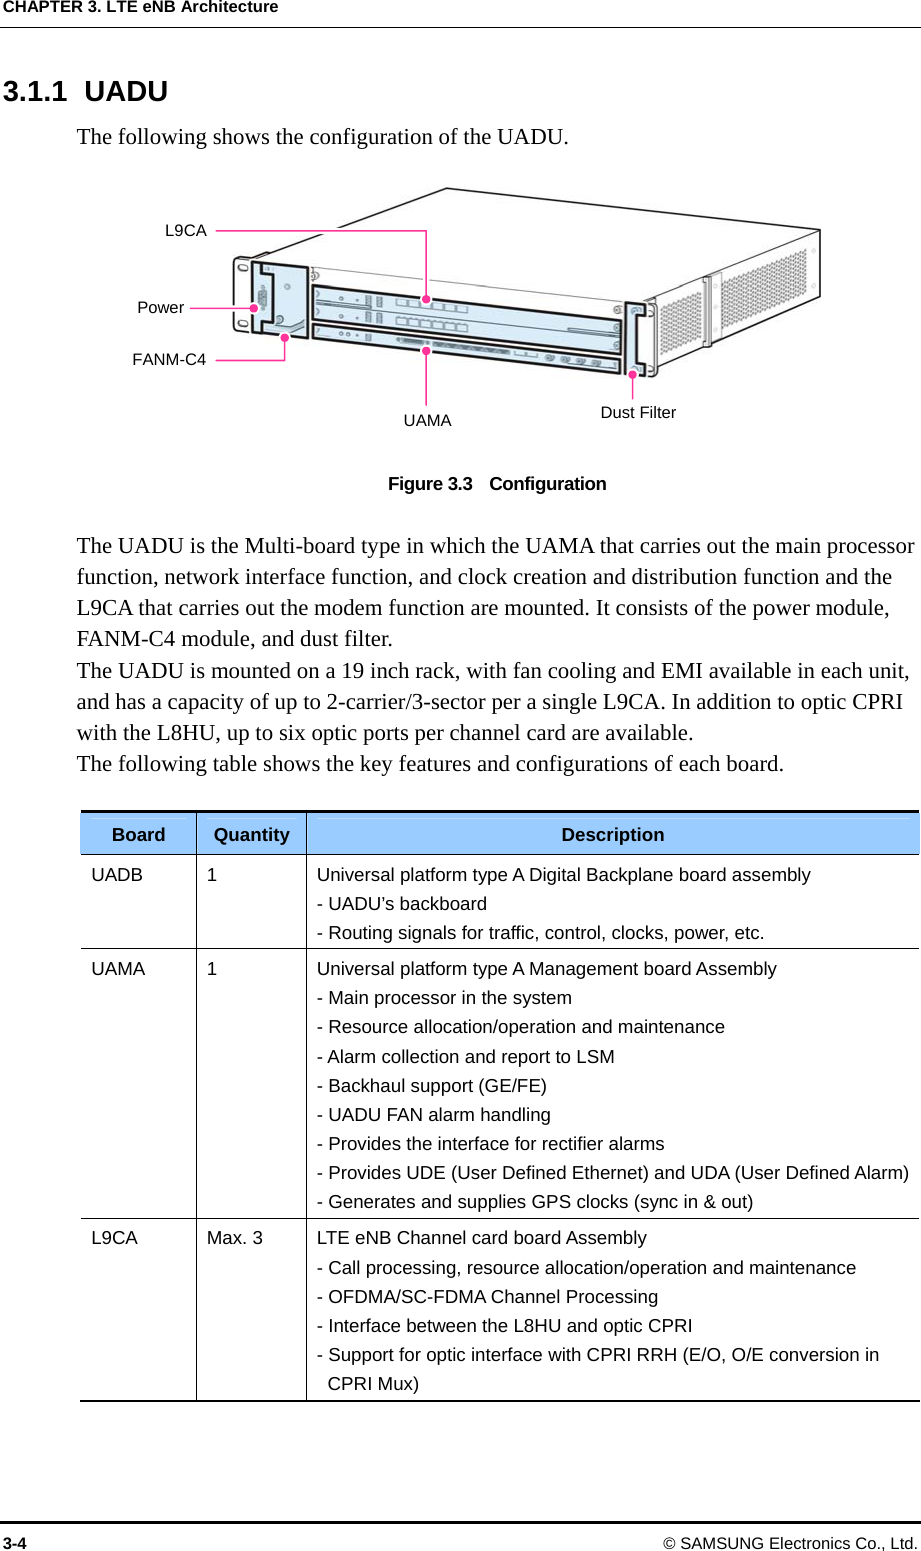 CHAPTER 3. LTE eNB Architecture 3.1.1 UADU The following shows the configuration of the UADU.  Power Dust Filter UAMA FANM-C4 L9CA Figure 3.3    Configuration  The UADU is the Multi-board type in which the UAMA that carries out the main processor function, network interface function, and clock creation and distribution function and the L9CA that carries out the modem function are mounted. It consists of the power module, FANM-C4 module, and dust filter. The UADU is mounted on a 19 inch rack, with fan cooling and EMI available in each unit, and has a capacity of up to 2-carrier/3-sector per a single L9CA. In addition to optic CPRI with the L8HU, up to six optic ports per channel card are available. The following table shows the key features and configurations of each board.  Board Quantity Description UADB 1 Universal platform type A Digital Backplane board assembly - UADU’s backboard - Routing signals for traffic, control, clocks, power, etc. UAMA 1 Universal platform type A Management board Assembly - Main processor in the system   - Resource allocation/operation and maintenance - Alarm collection and report to LSM   - Backhaul support (GE/FE)   - UADU FAN alarm handling - Provides the interface for rectifier alarms - Provides UDE (User Defined Ethernet) and UDA (User Defined Alarm) - Generates and supplies GPS clocks (sync in &amp; out) L9CA Max. 3 LTE eNB Channel card board Assembly   - Call processing, resource allocation/operation and maintenance   - OFDMA/SC-FDMA Channel Processing   - Interface between the L8HU and optic CPRI   - Support for optic interface with CPRI RRH (E/O, O/E conversion in CPRI Mux)   3-4 © SAMSUNG Electronics Co., Ltd. 